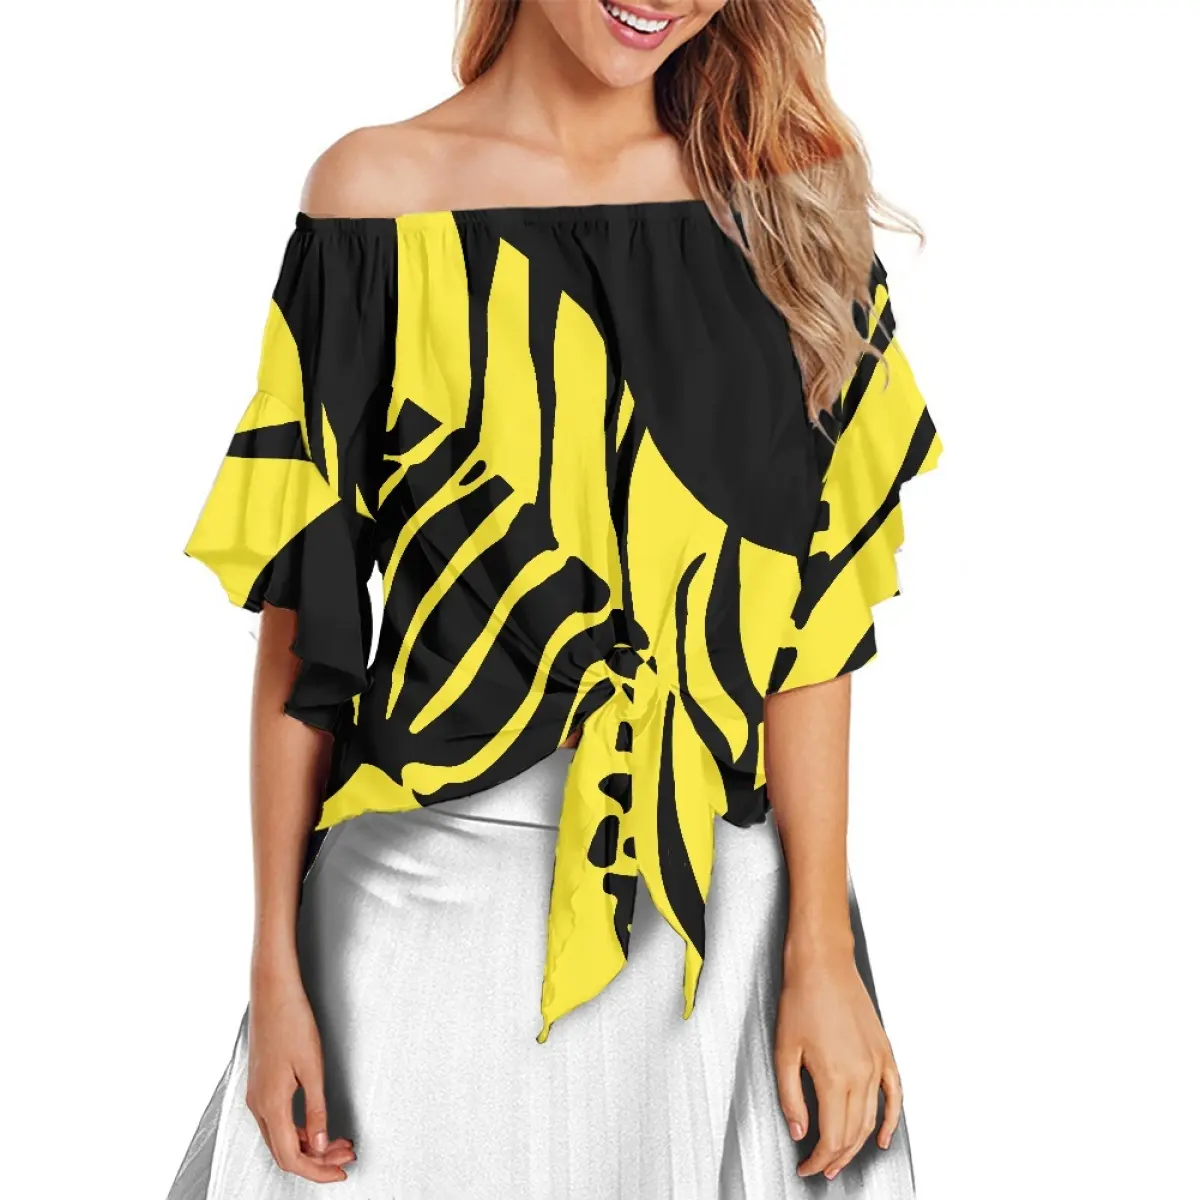 Black And Yellow Polynesian Chiffon Shirts For Women Hot Sale Wholesale Girls' Off Shoulder Blouse Summer Oversized Blouse